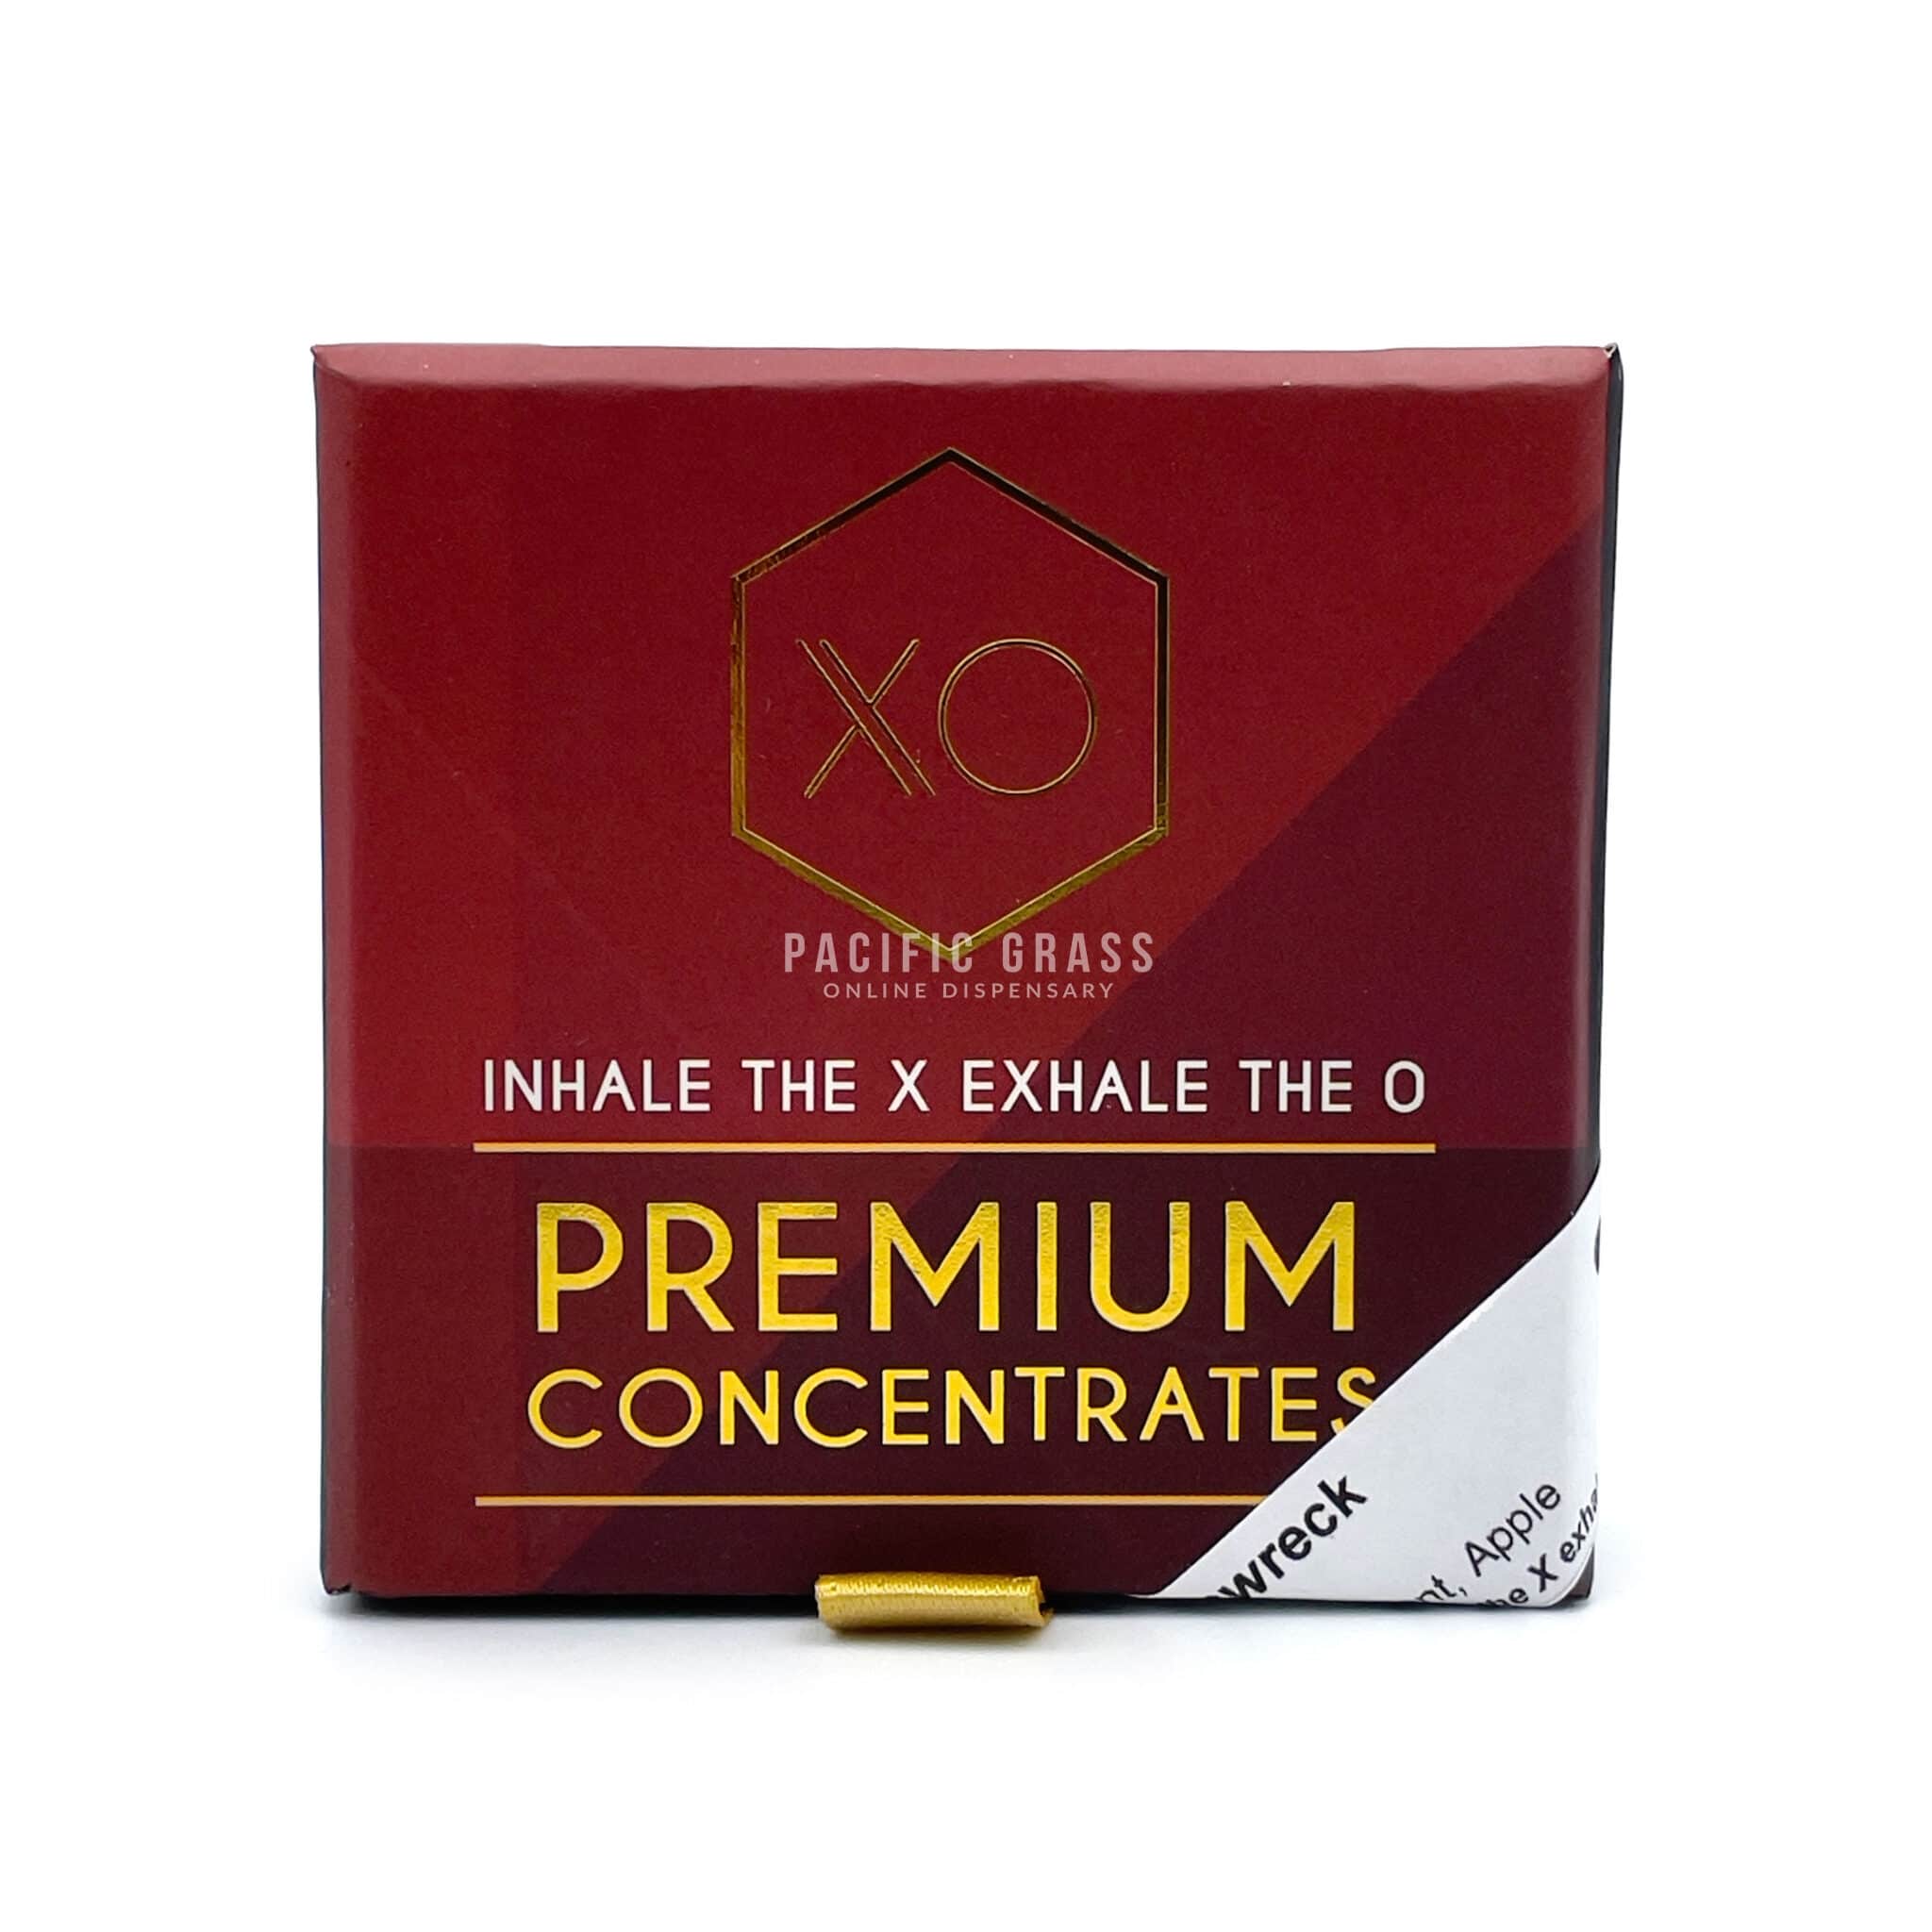 XO Premium Concentrates Shatter (2g) Trainwreck